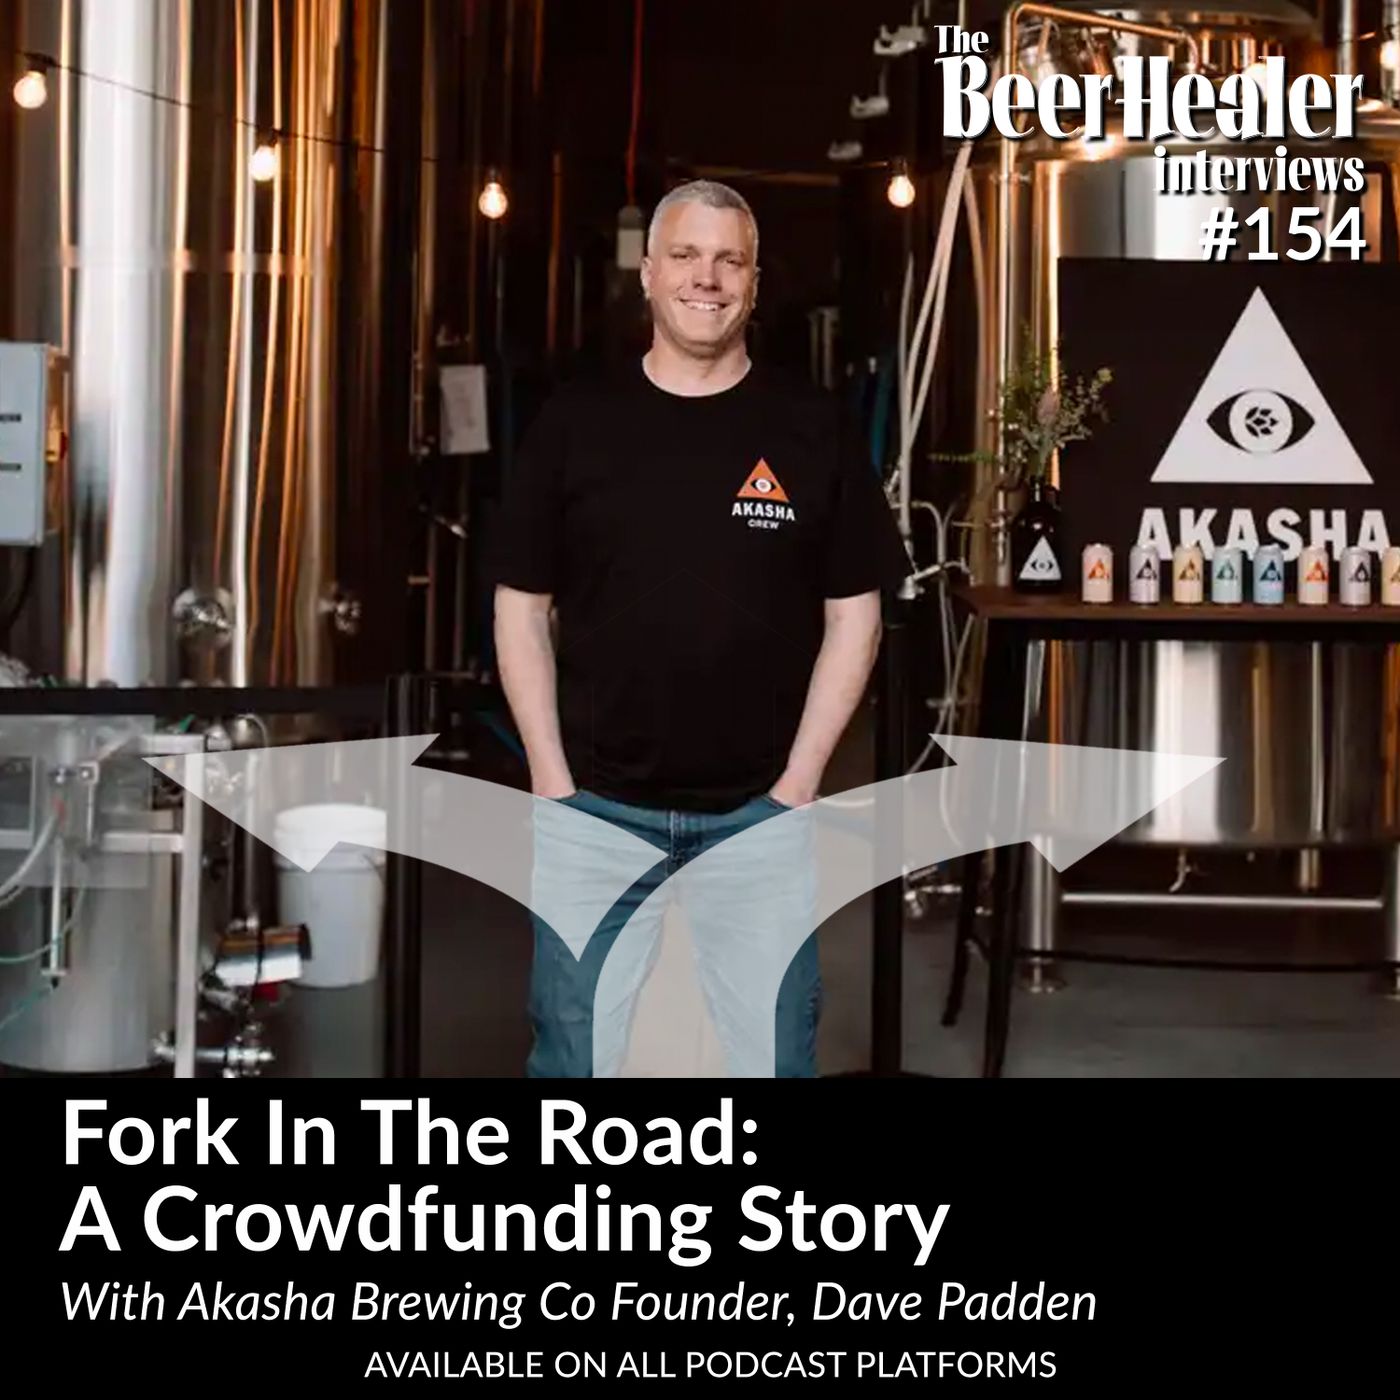 Ep. 154 - Fork In The Road: A Crowdfunding Story. With Akasha Brewing Founder, Dave Padden.